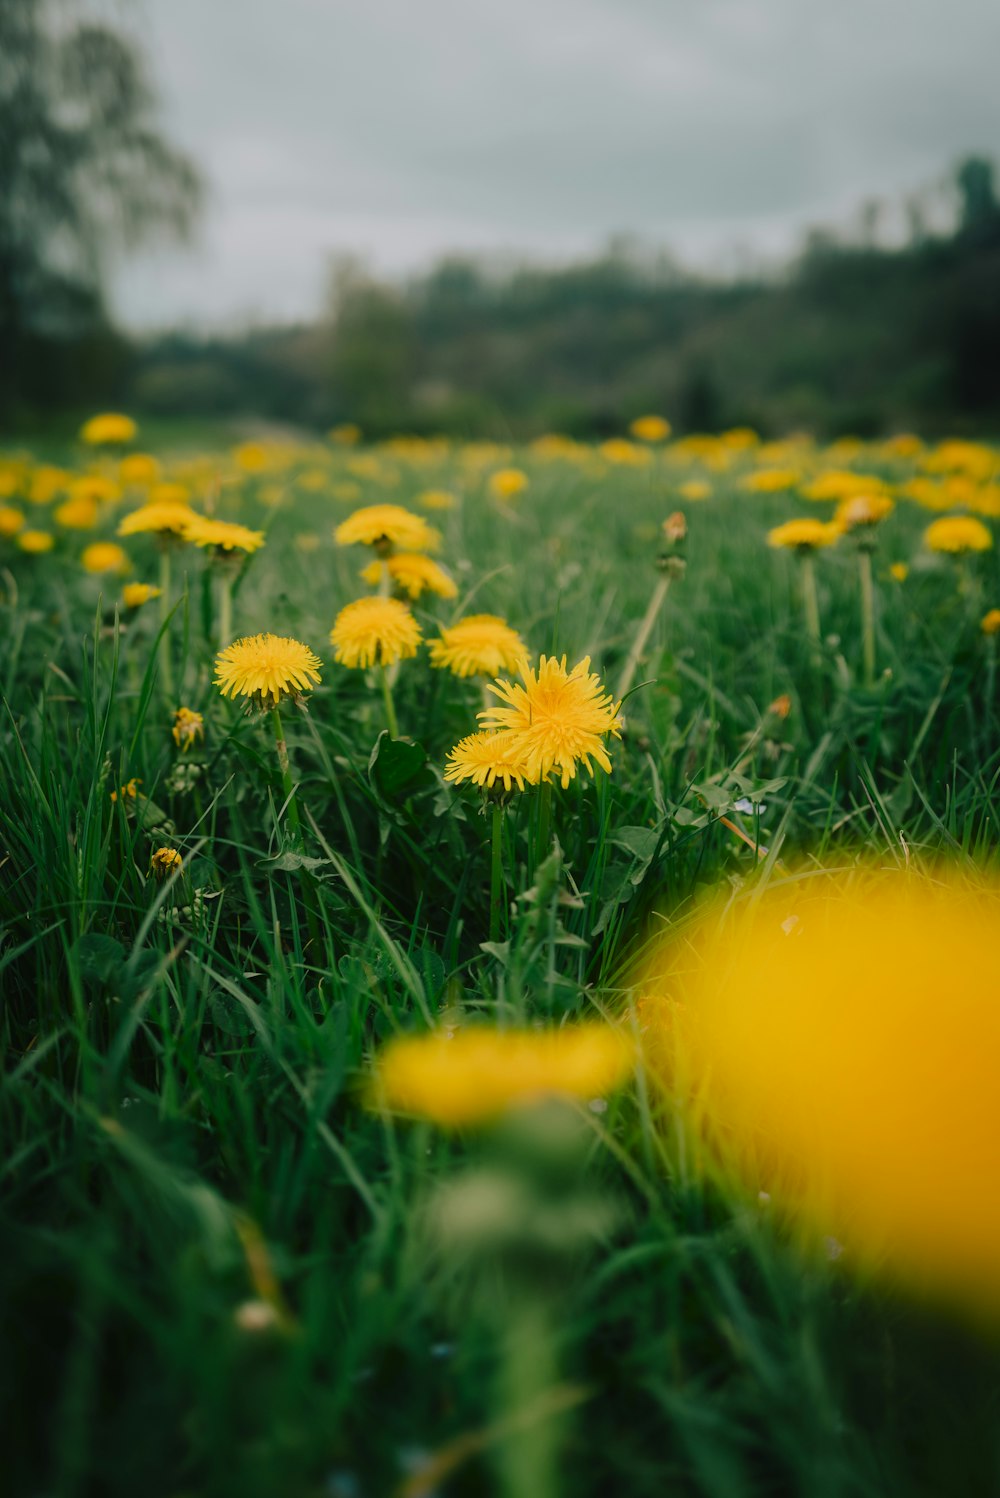 yellow and white flowers on green grass field during daytime